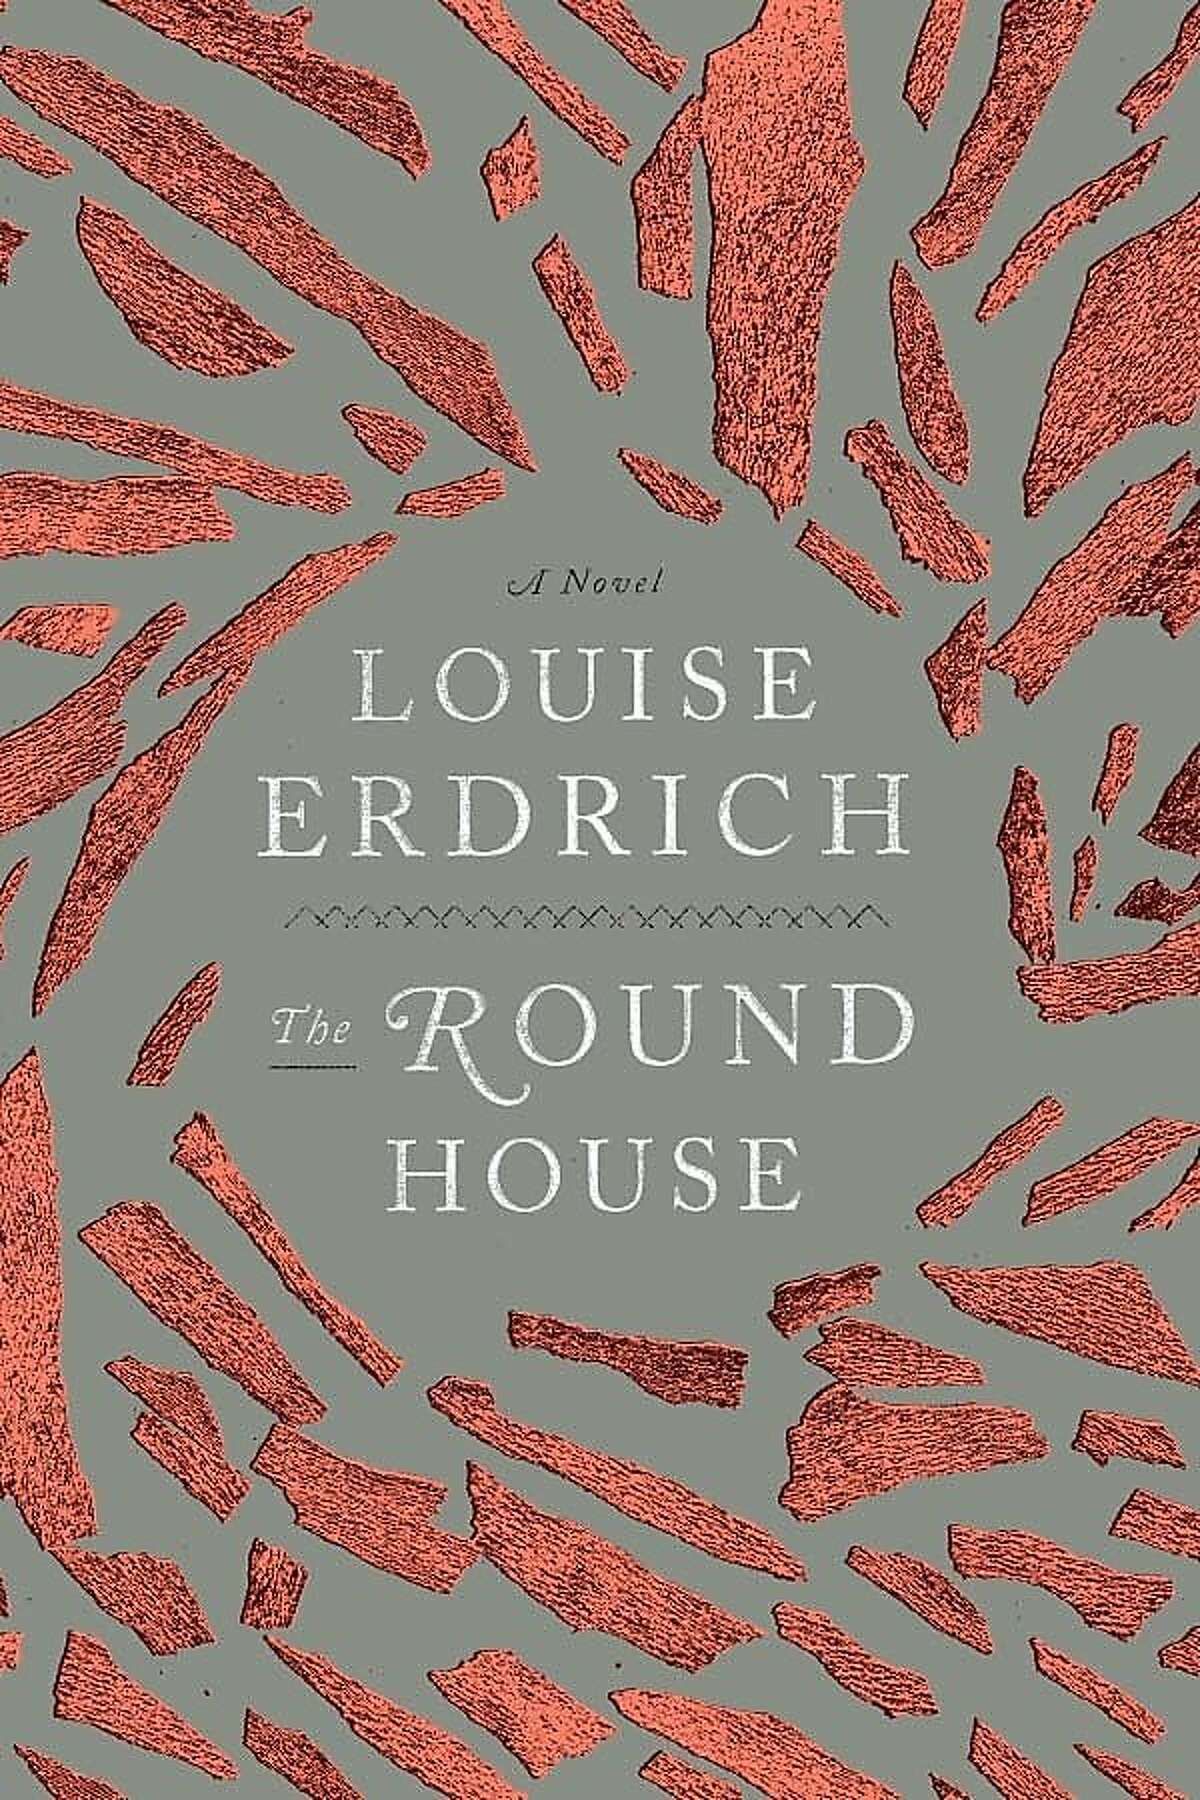 essay on the round house